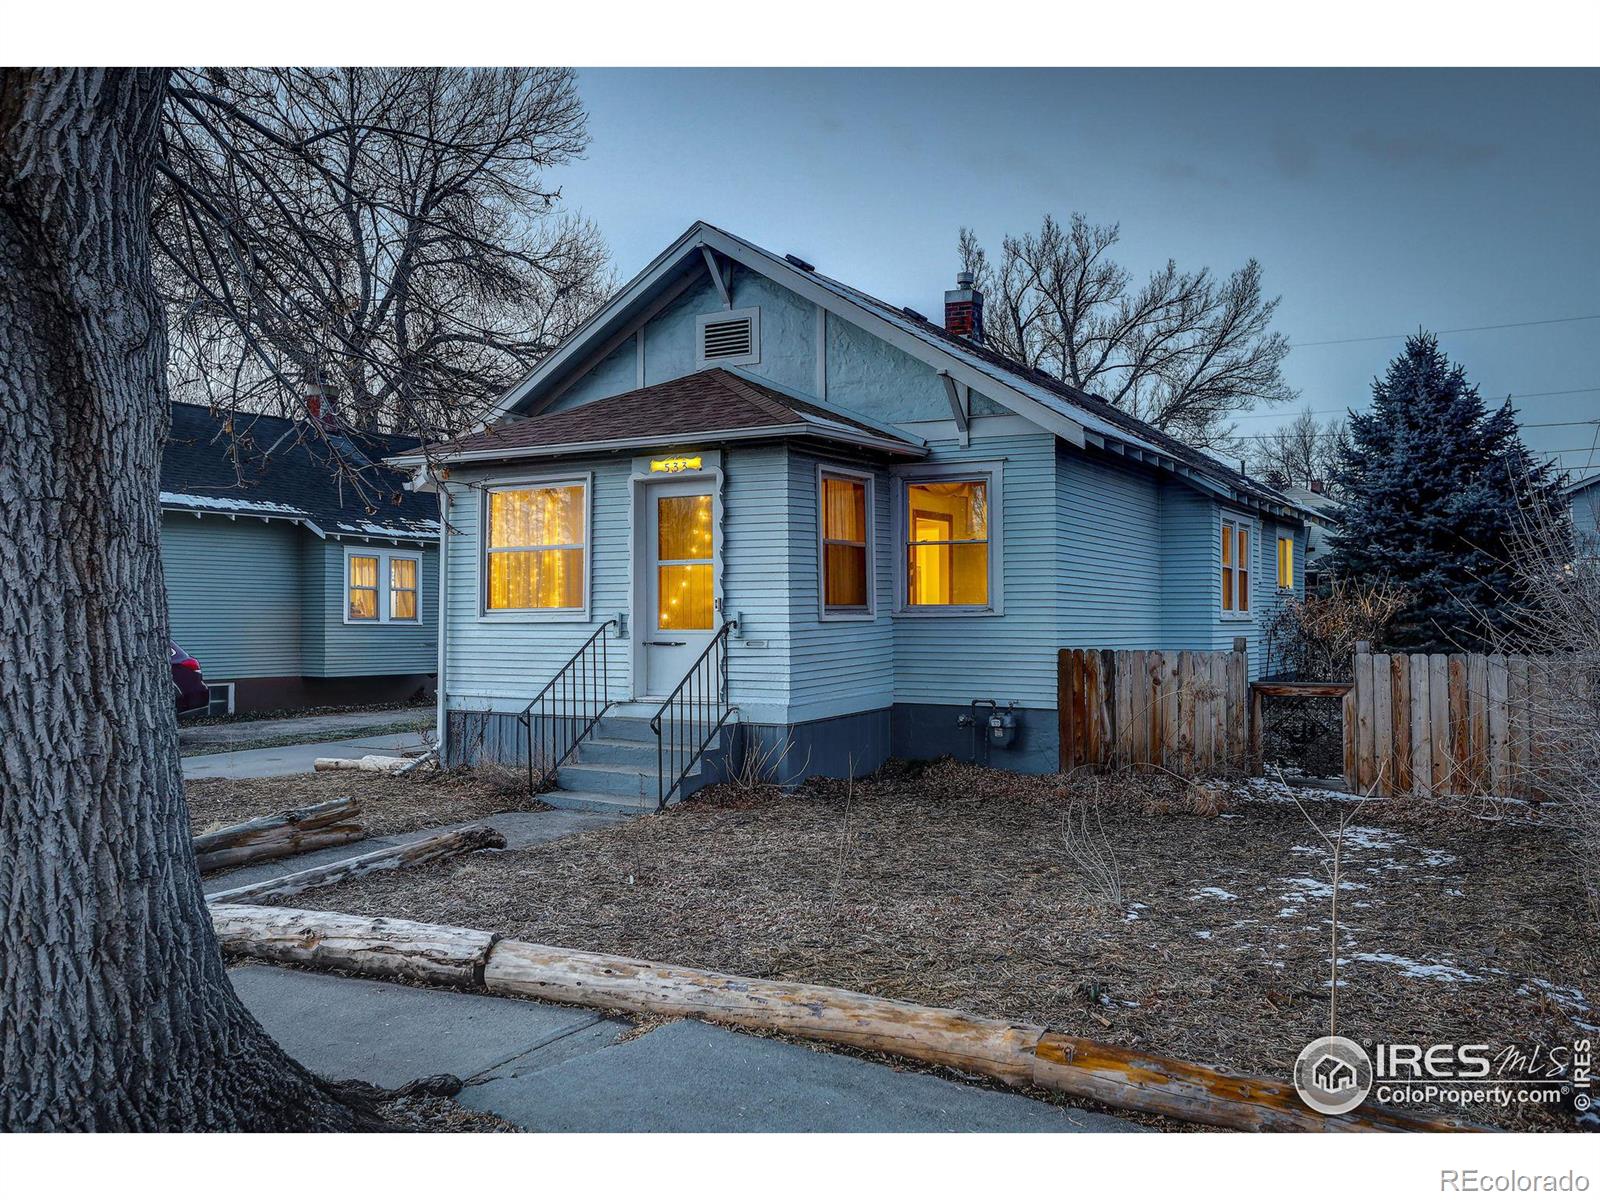 Report Image for 533 W 2nd Street,Loveland, Colorado